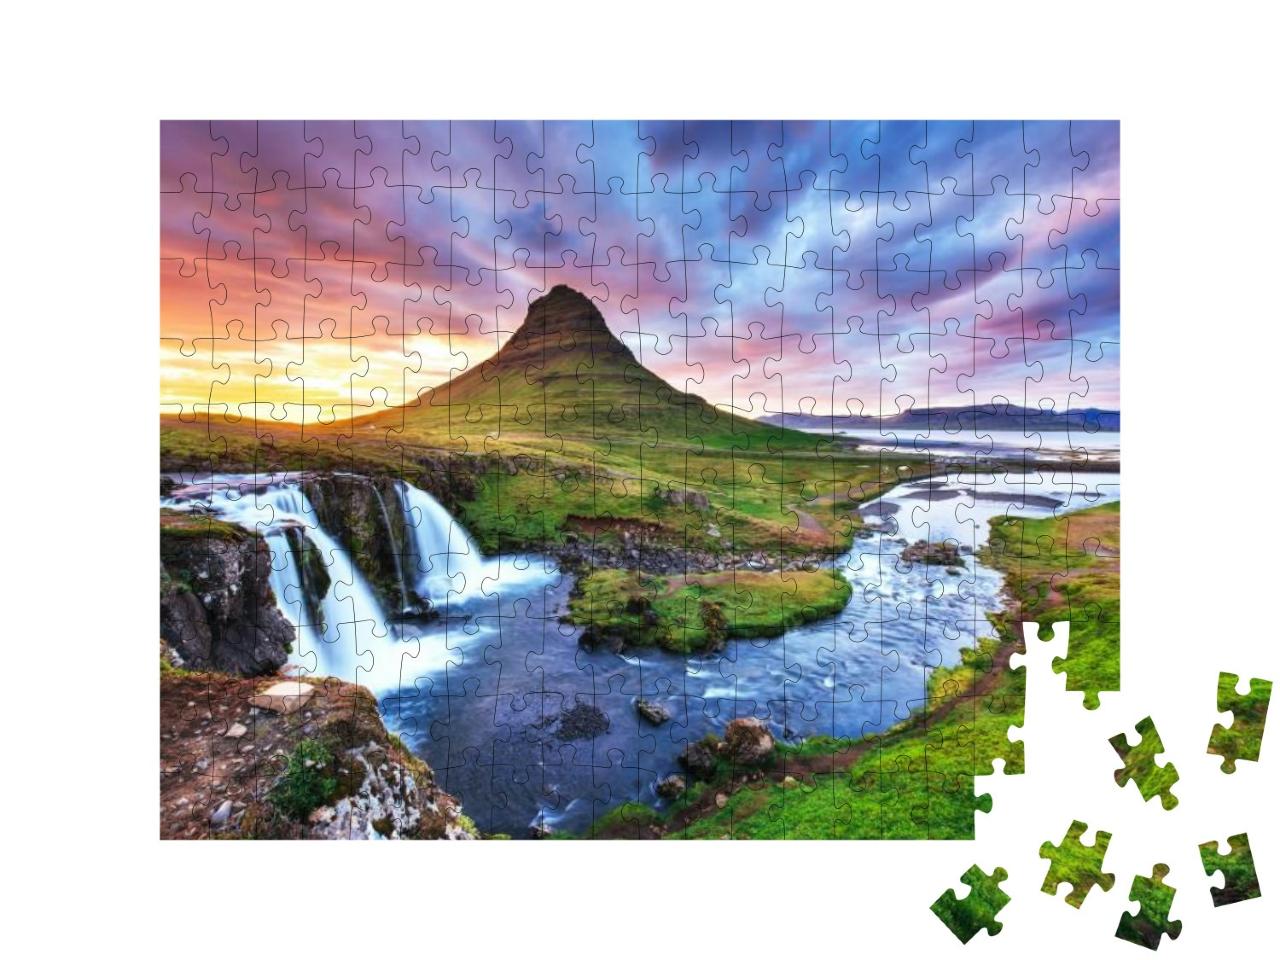 The Picturesque Sunset Over Landscapes & Waterfalls. Kirk... Jigsaw Puzzle with 200 pieces